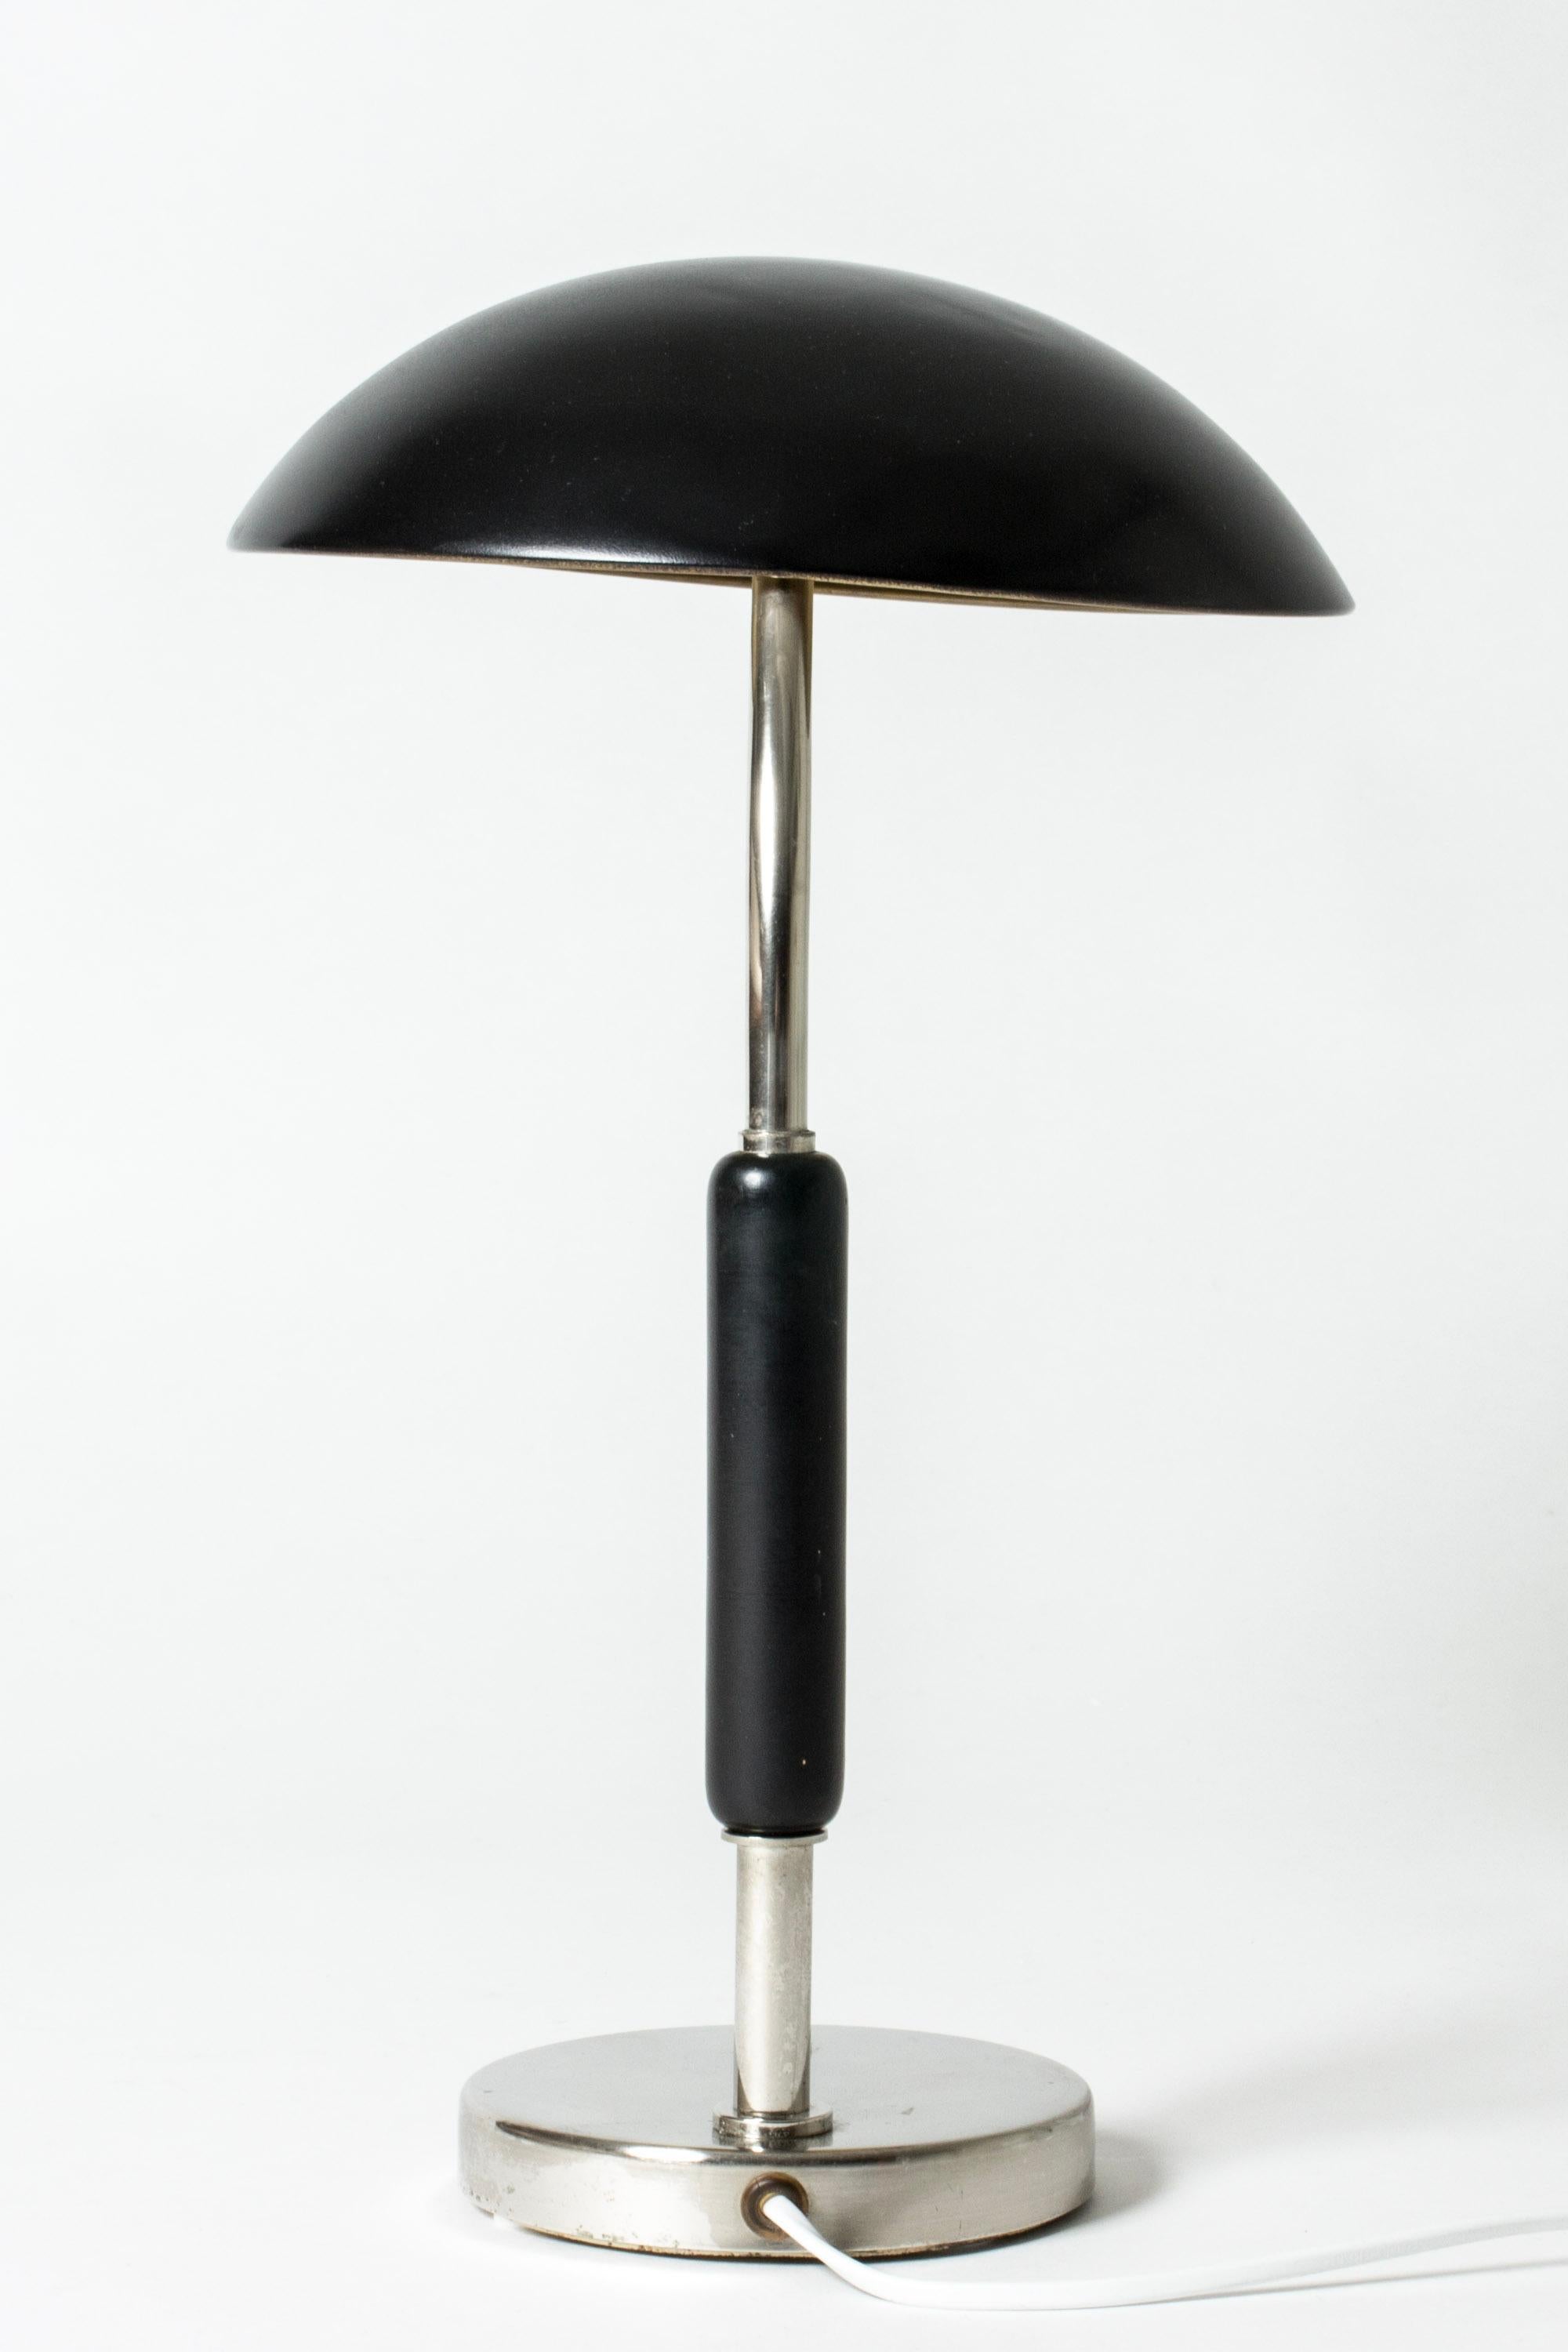 Swedish Vintage Functionalist Table or Desk Lamp from ASEA, Sweden, 1930s For Sale